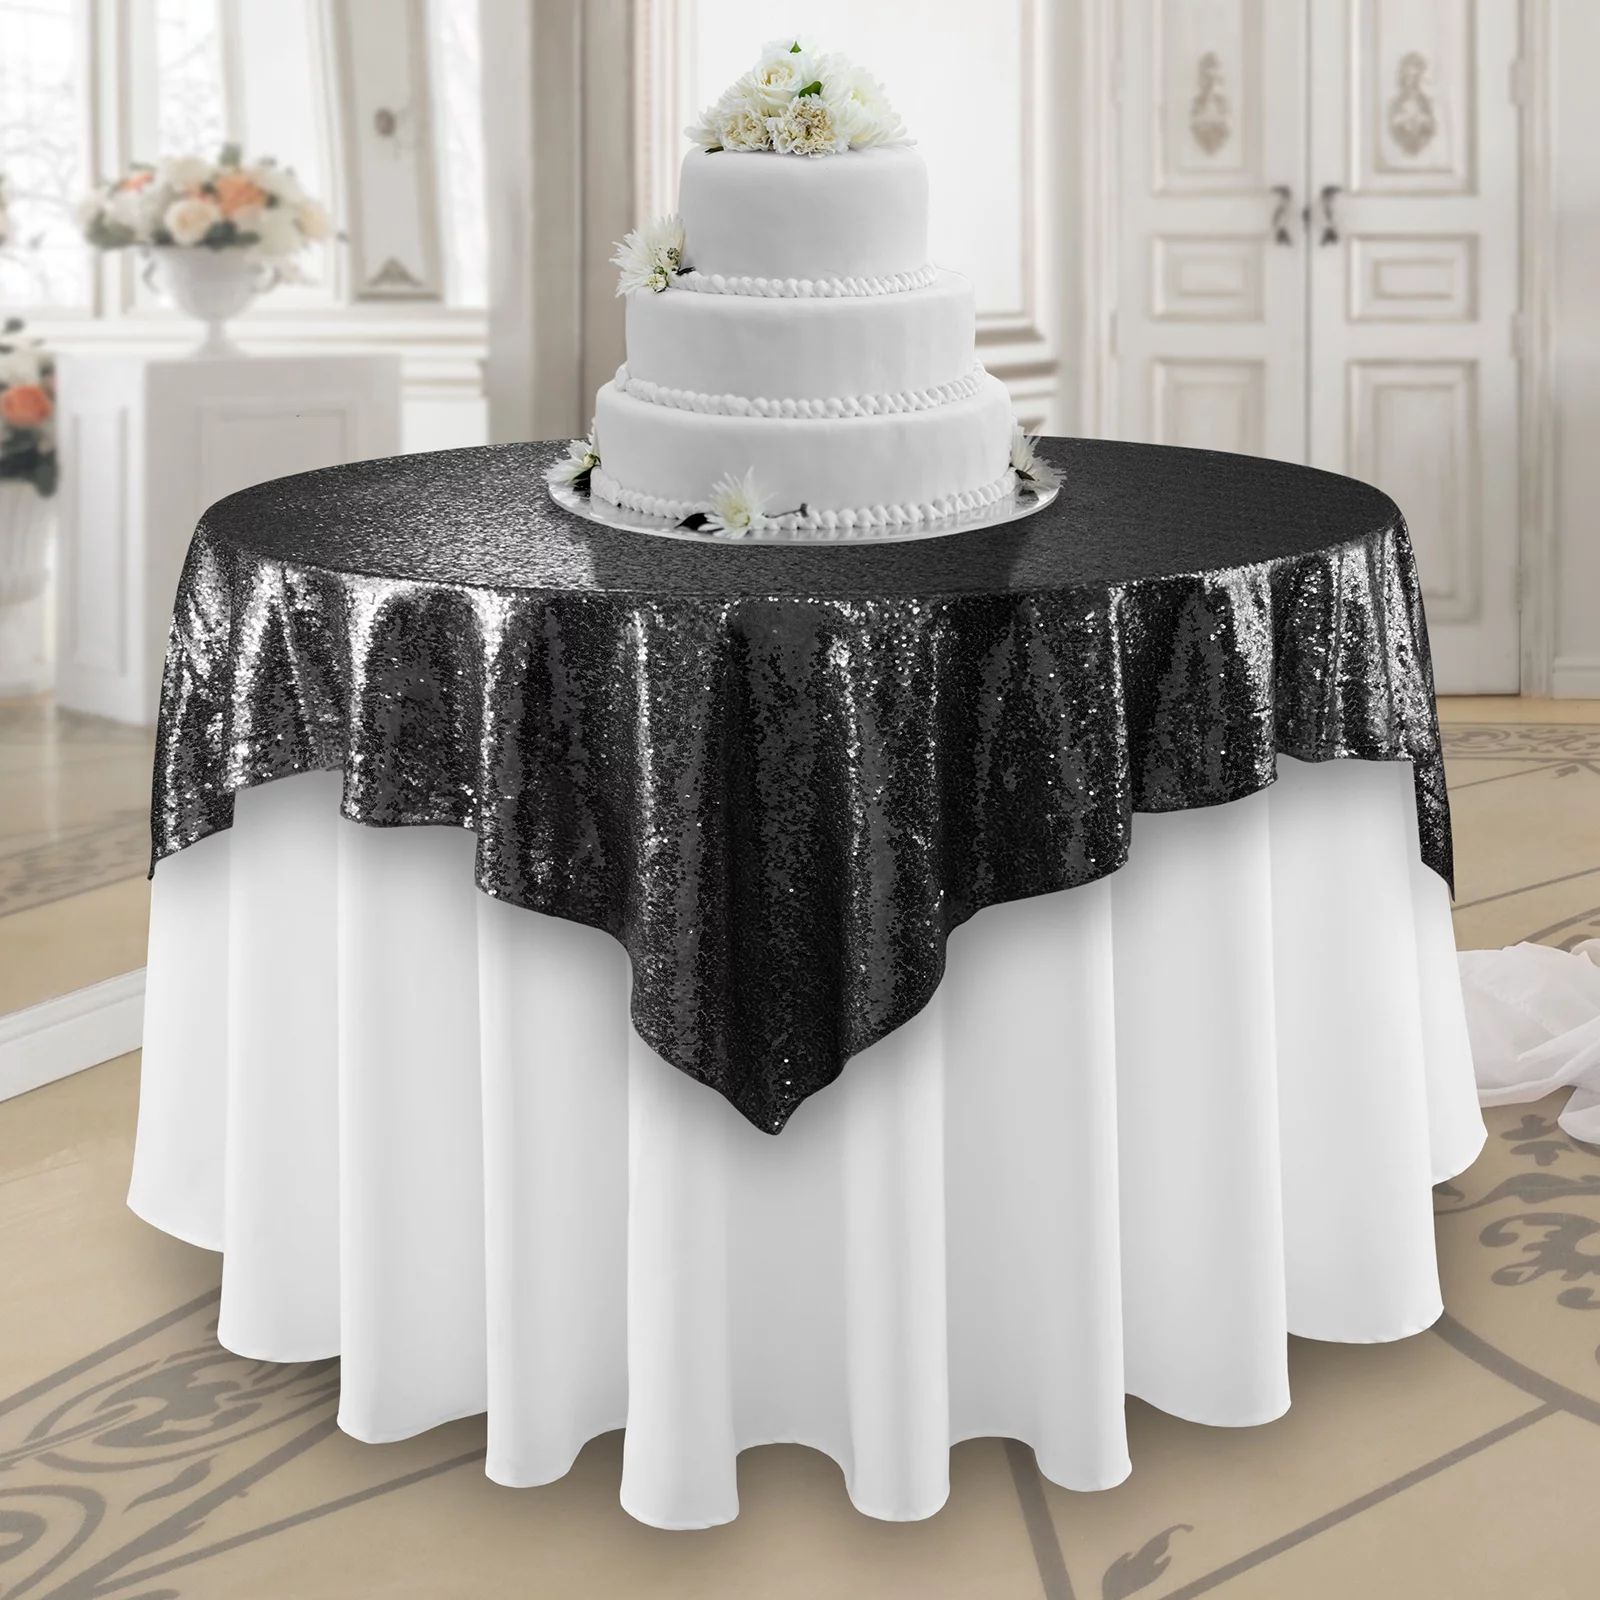 Lann's Linens 50" x 50" Black Sequin Tablecloth Overlay, Sparkly Square Table Cloth for Wedding, ... | Walmart (US)